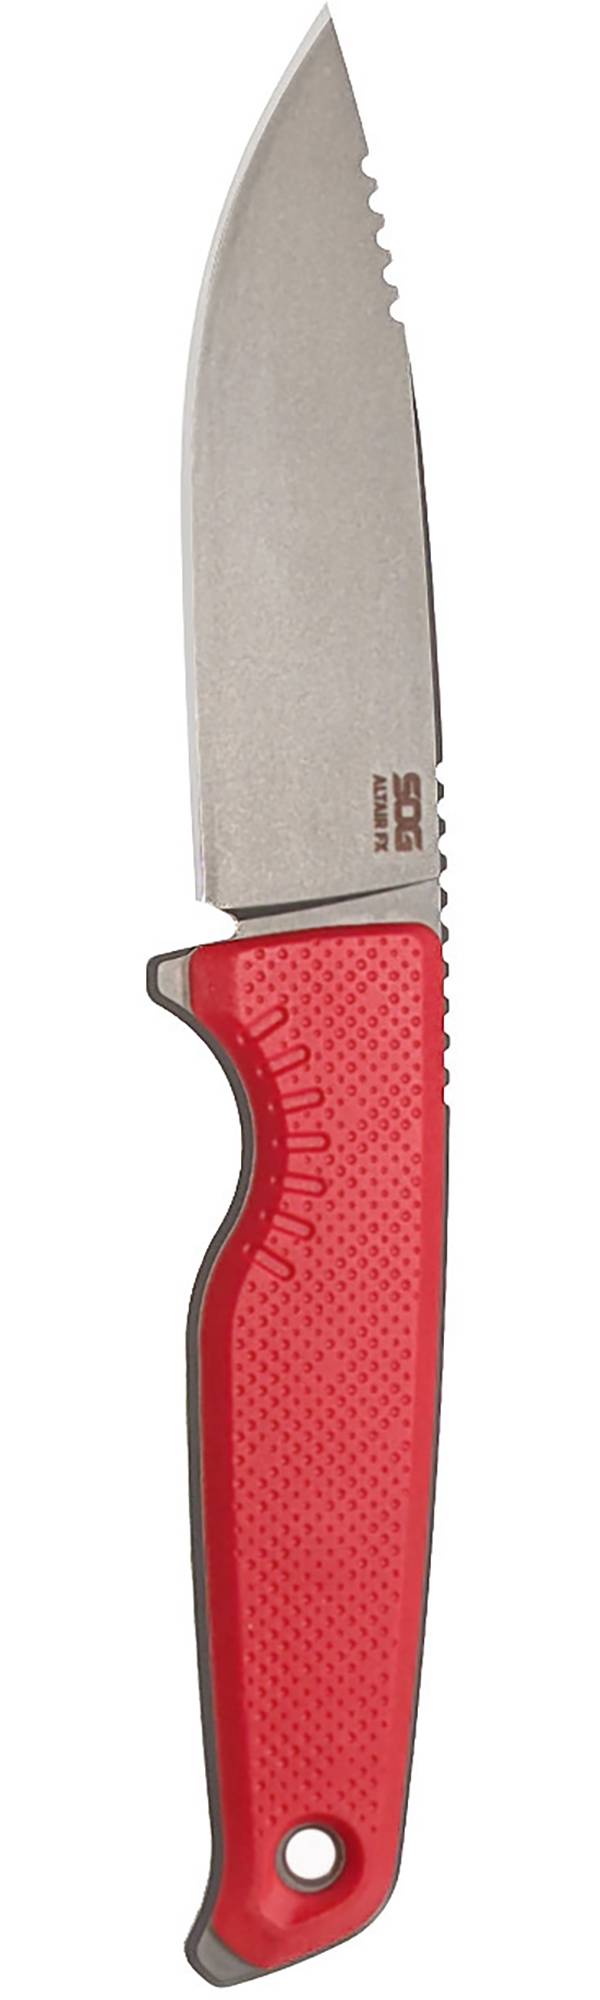 SOG Specialty Knives Altair FX Knife product image